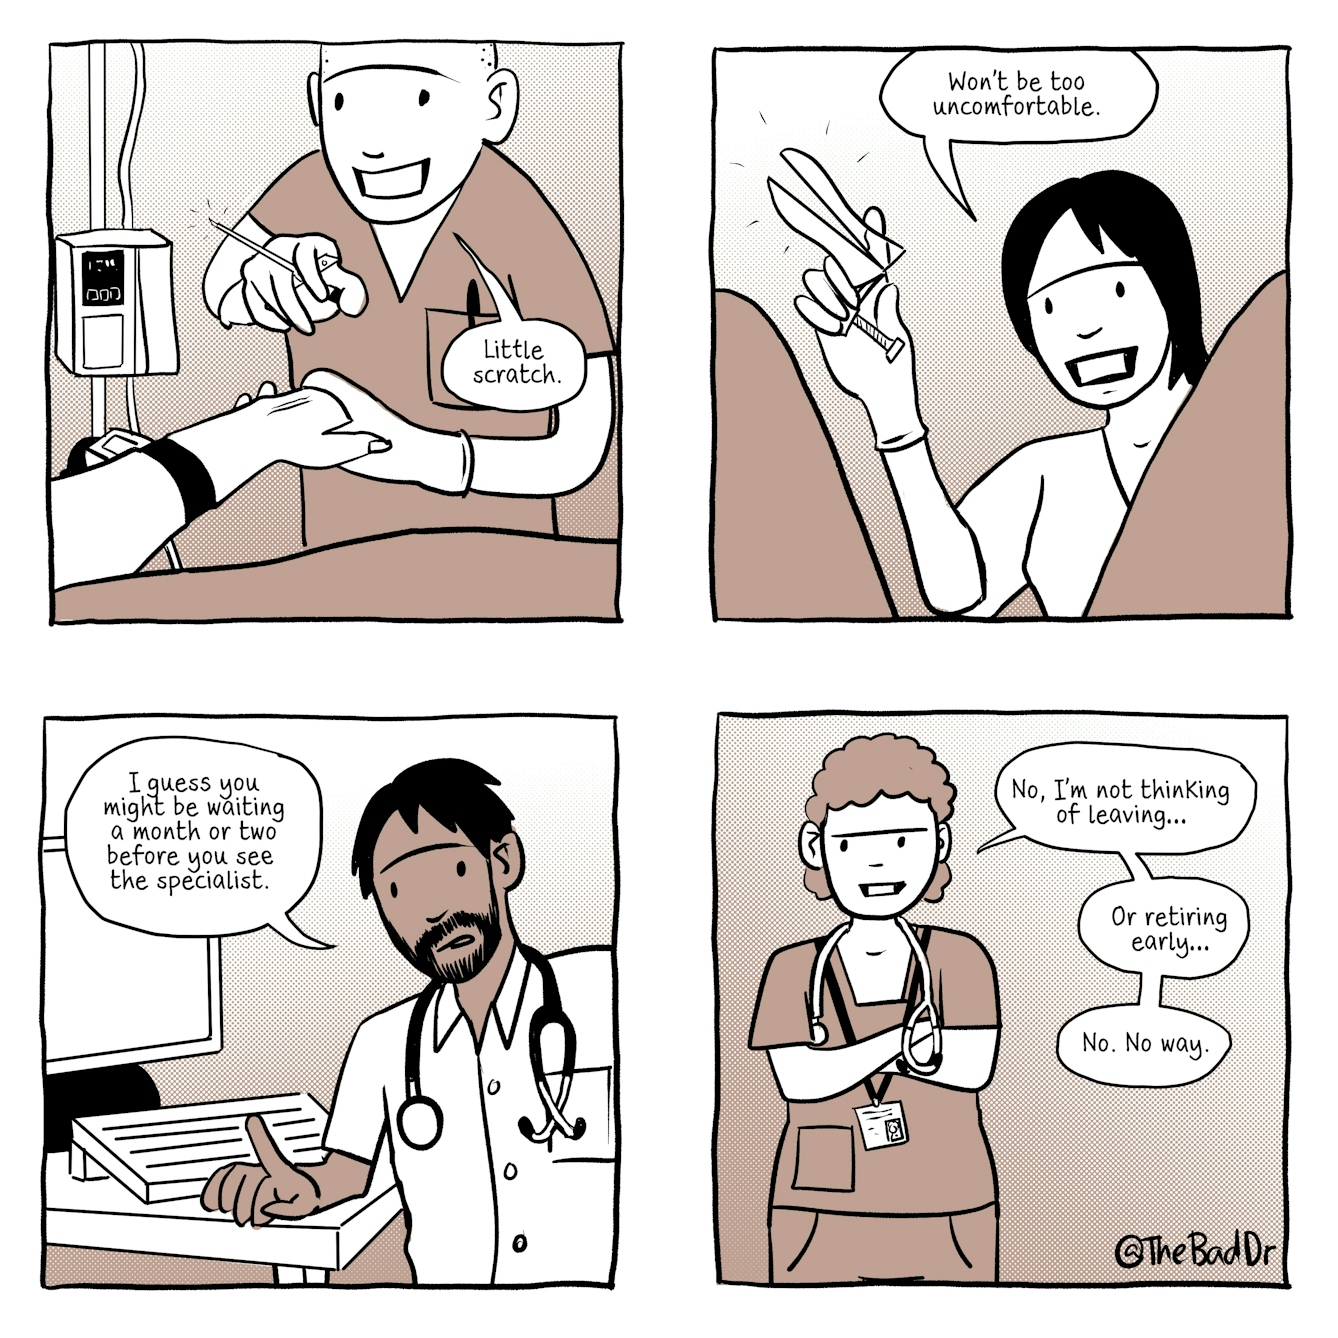 A four panel comic in black and white with a light brown accent tone. 

The first panel shows a young male doctor holding a syringe in one hand and the hand of a patient in the other. He is smiling in a vaguely reassuring way and is saying, "Little scratch."

The second panel shows a view from a patient's perspective who has her knees raised and slightly apart. Between her legs is a female doctor who is is smiling in a vaguely reassuring way, holding a speculum in her hand. She is saying, "Won't be too uncomfortable."

The third panel shows a male doctor with a beard and a stethoscope around his neck who is sitting at his desk infront of his computer. He is leading forward one finger raised saying, "I guess you might be waiting a month or two before you see the specialist."

The forth and final panel shows a female doctor with an ID lanyard and stethoscope around her neck, her arms are folded in a defensive, withholding manner. She is saying, "No, I'm not thinking of leaving... or retiring early..no. No way."